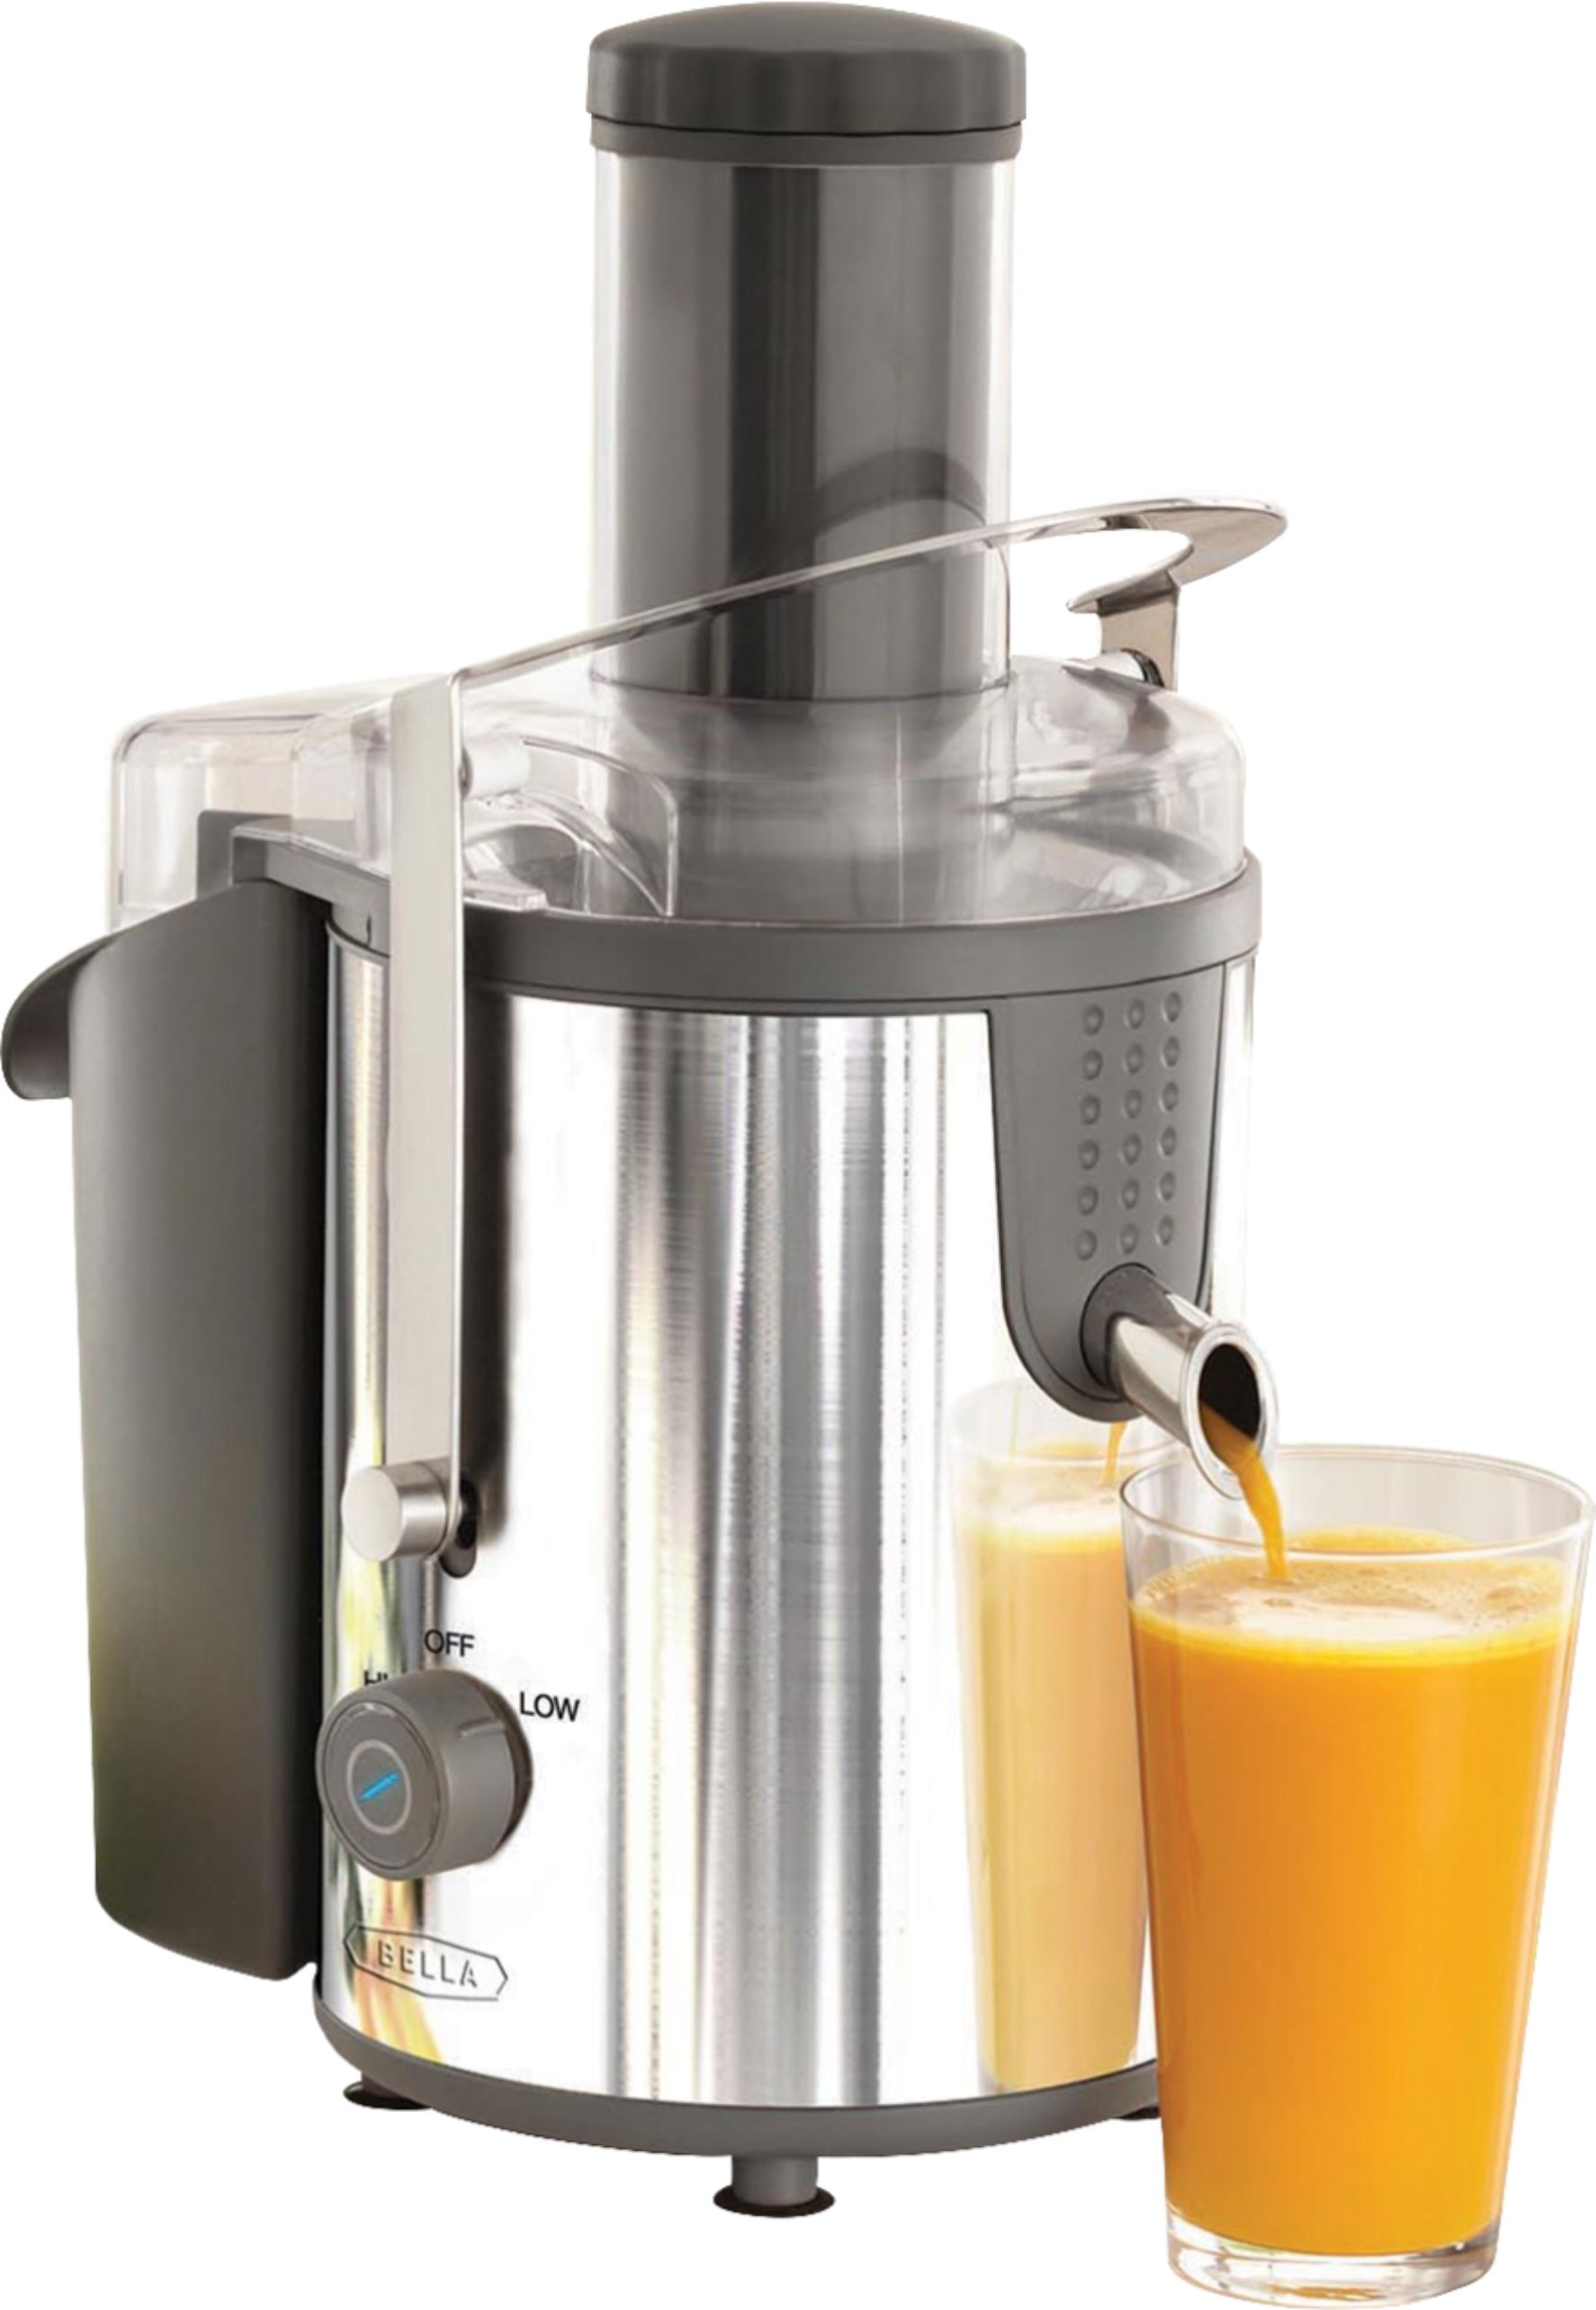 Bella 13694 Juice Extractor Stainless Steel High Power Vegetable Fruit  Juicer for Sale in South Elgin, IL - OfferUp